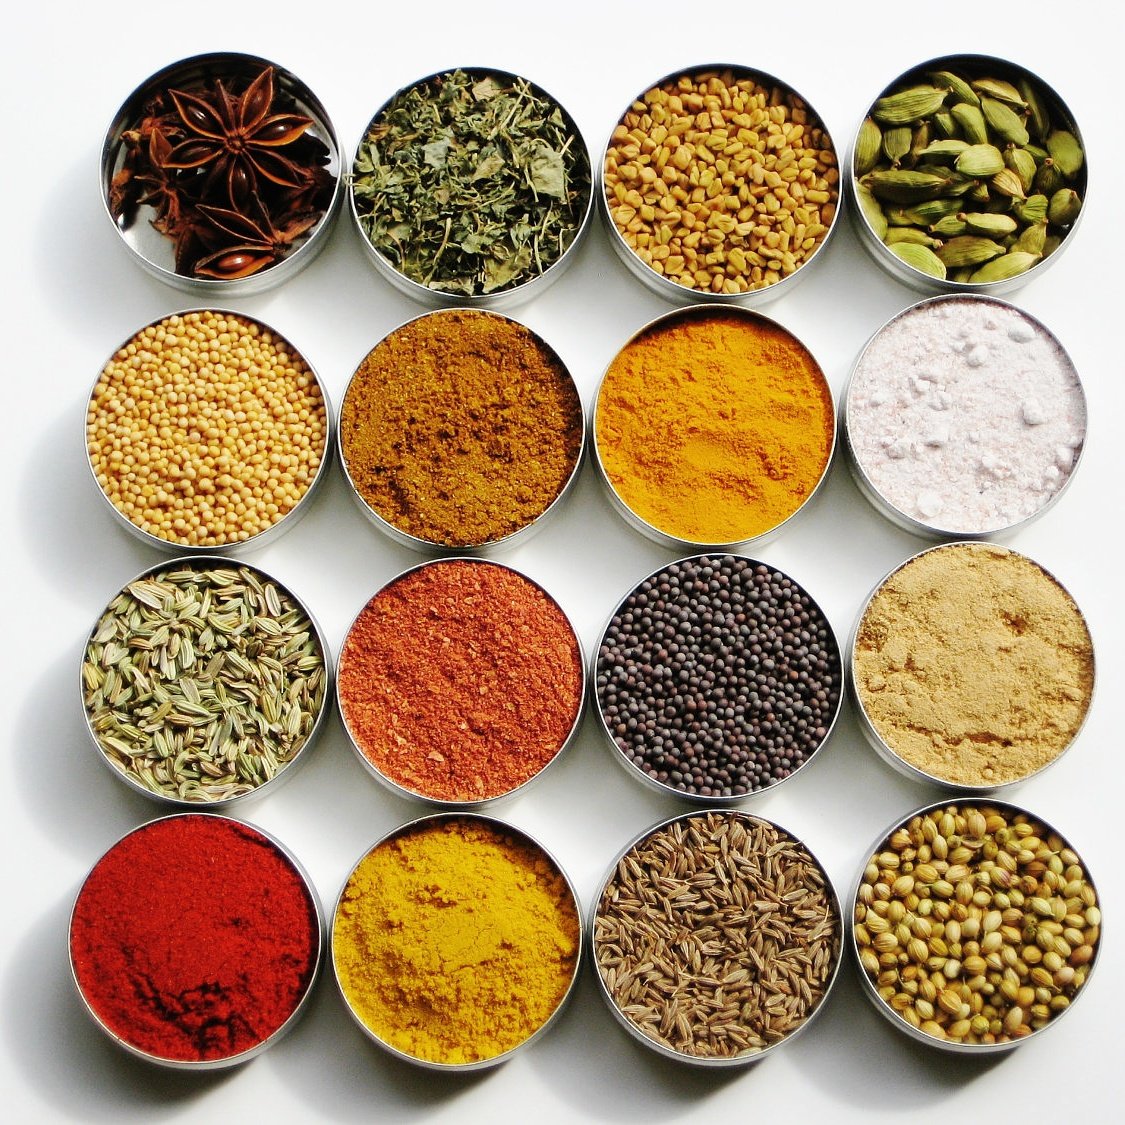 #Spices for #cooking your favourite dishes! Available all year round. The finest spices from indispice. #cooking #cookingwithspices #herbs